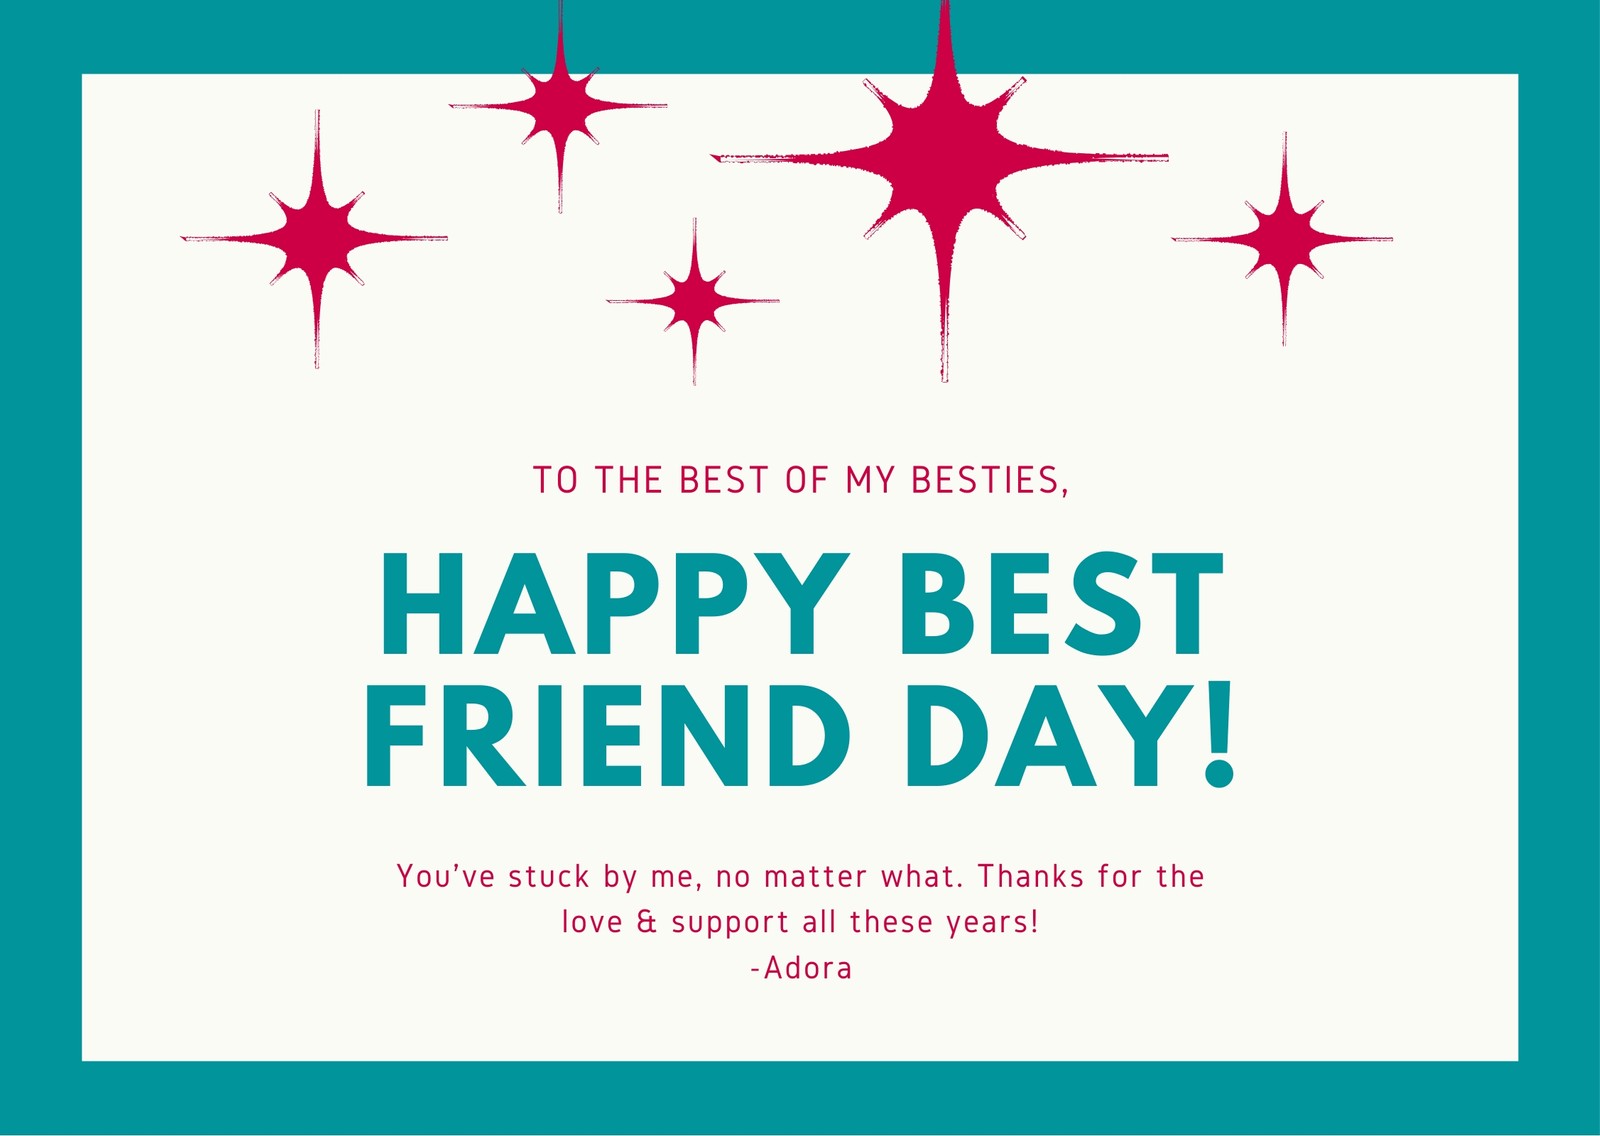 customize-11-best-friend-day-cards-templates-online-canva